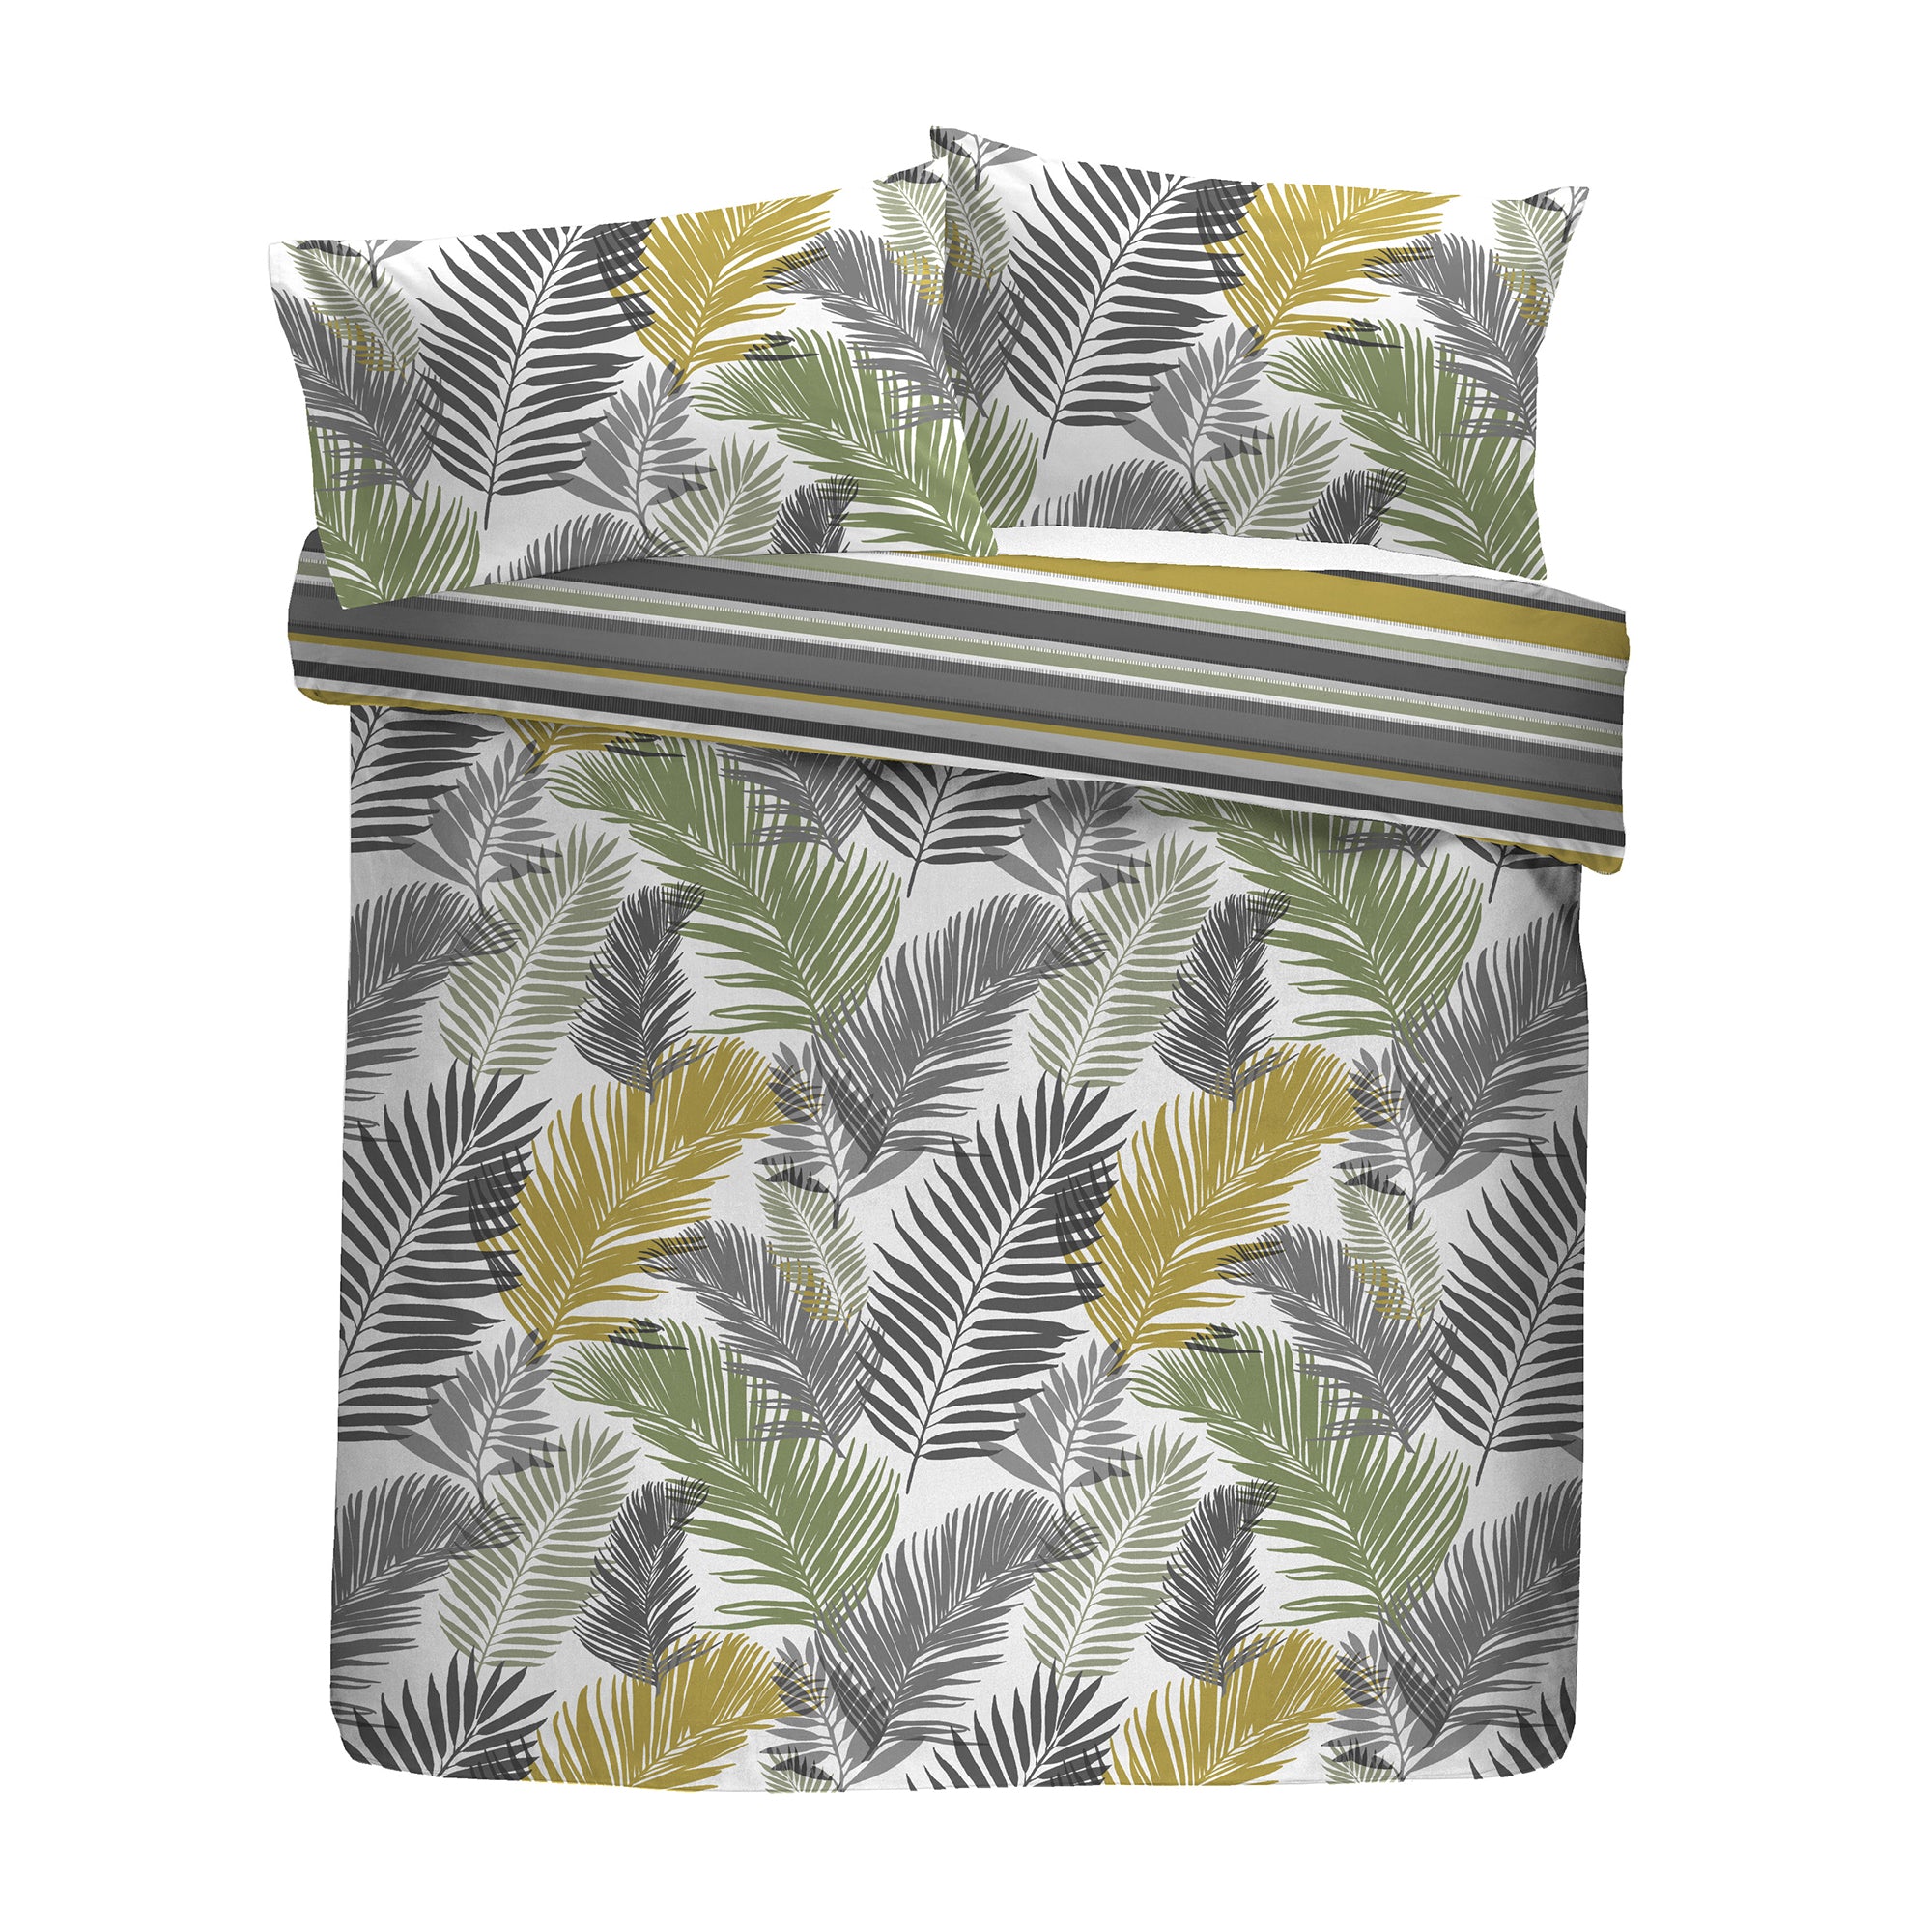 Tropical - Easy Care Duvet Cover Set in Ochre - By Fusion